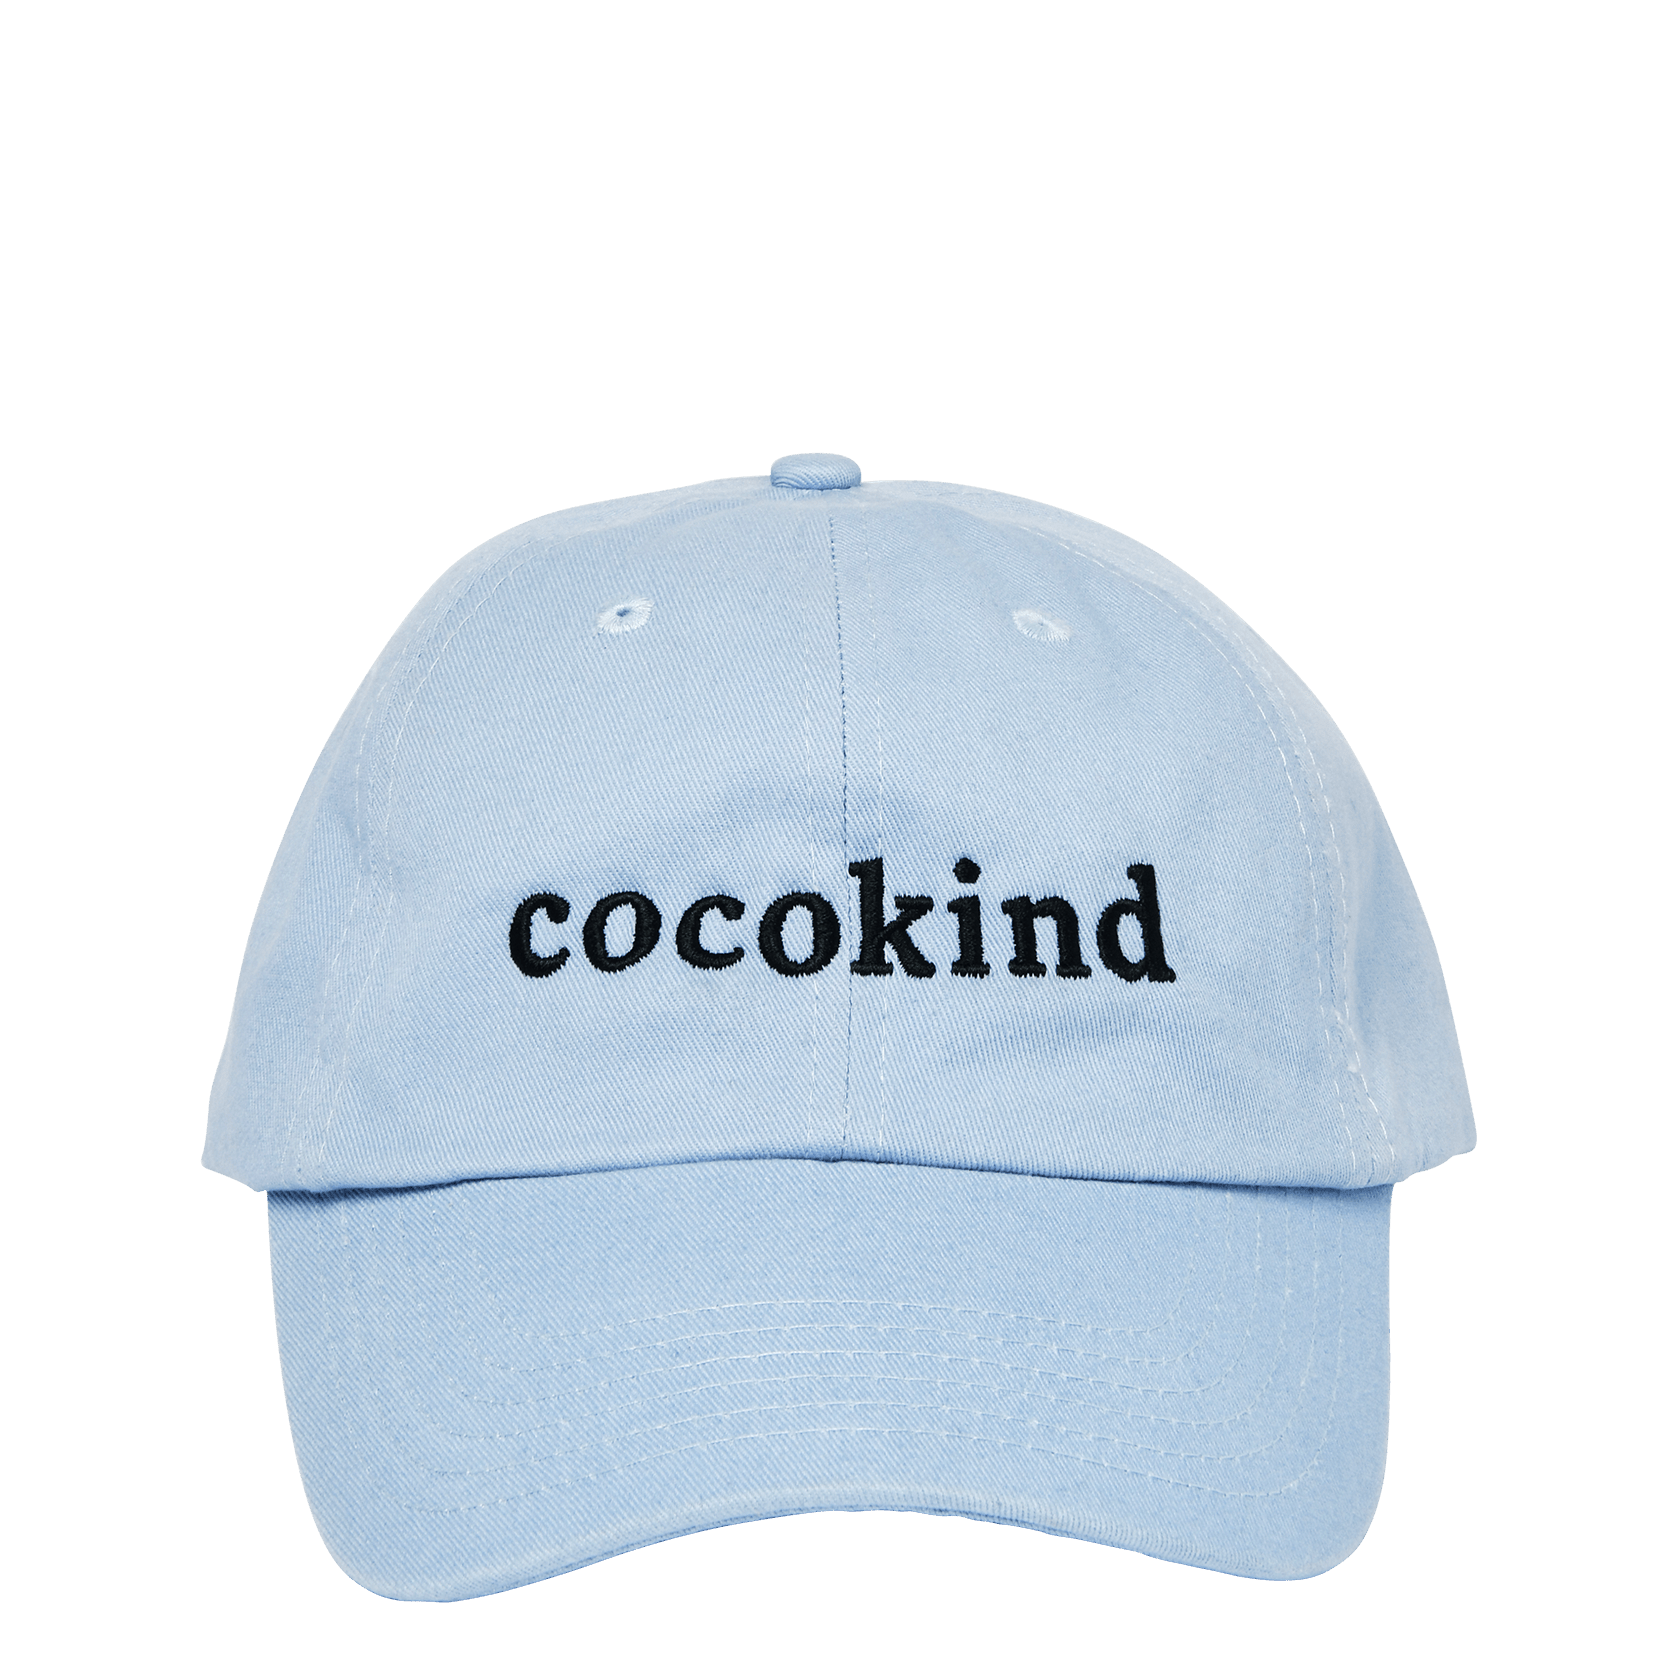 special edition hat - cocokind